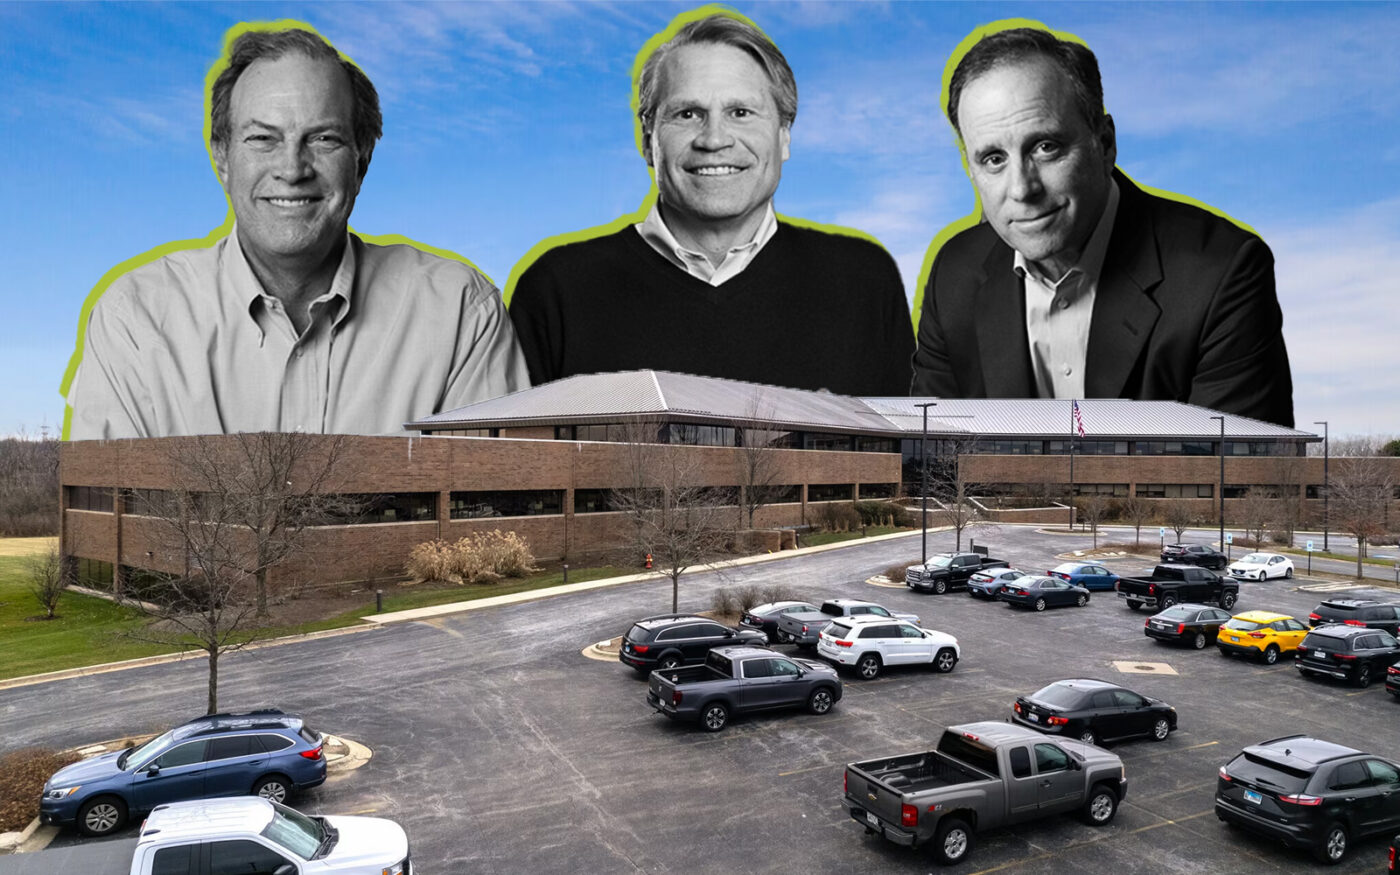 2100 Norman Drive in Waukegan with Fulcrum Asset Advisors’ Tom Cox, Scott Stahr and Peter Broccolo